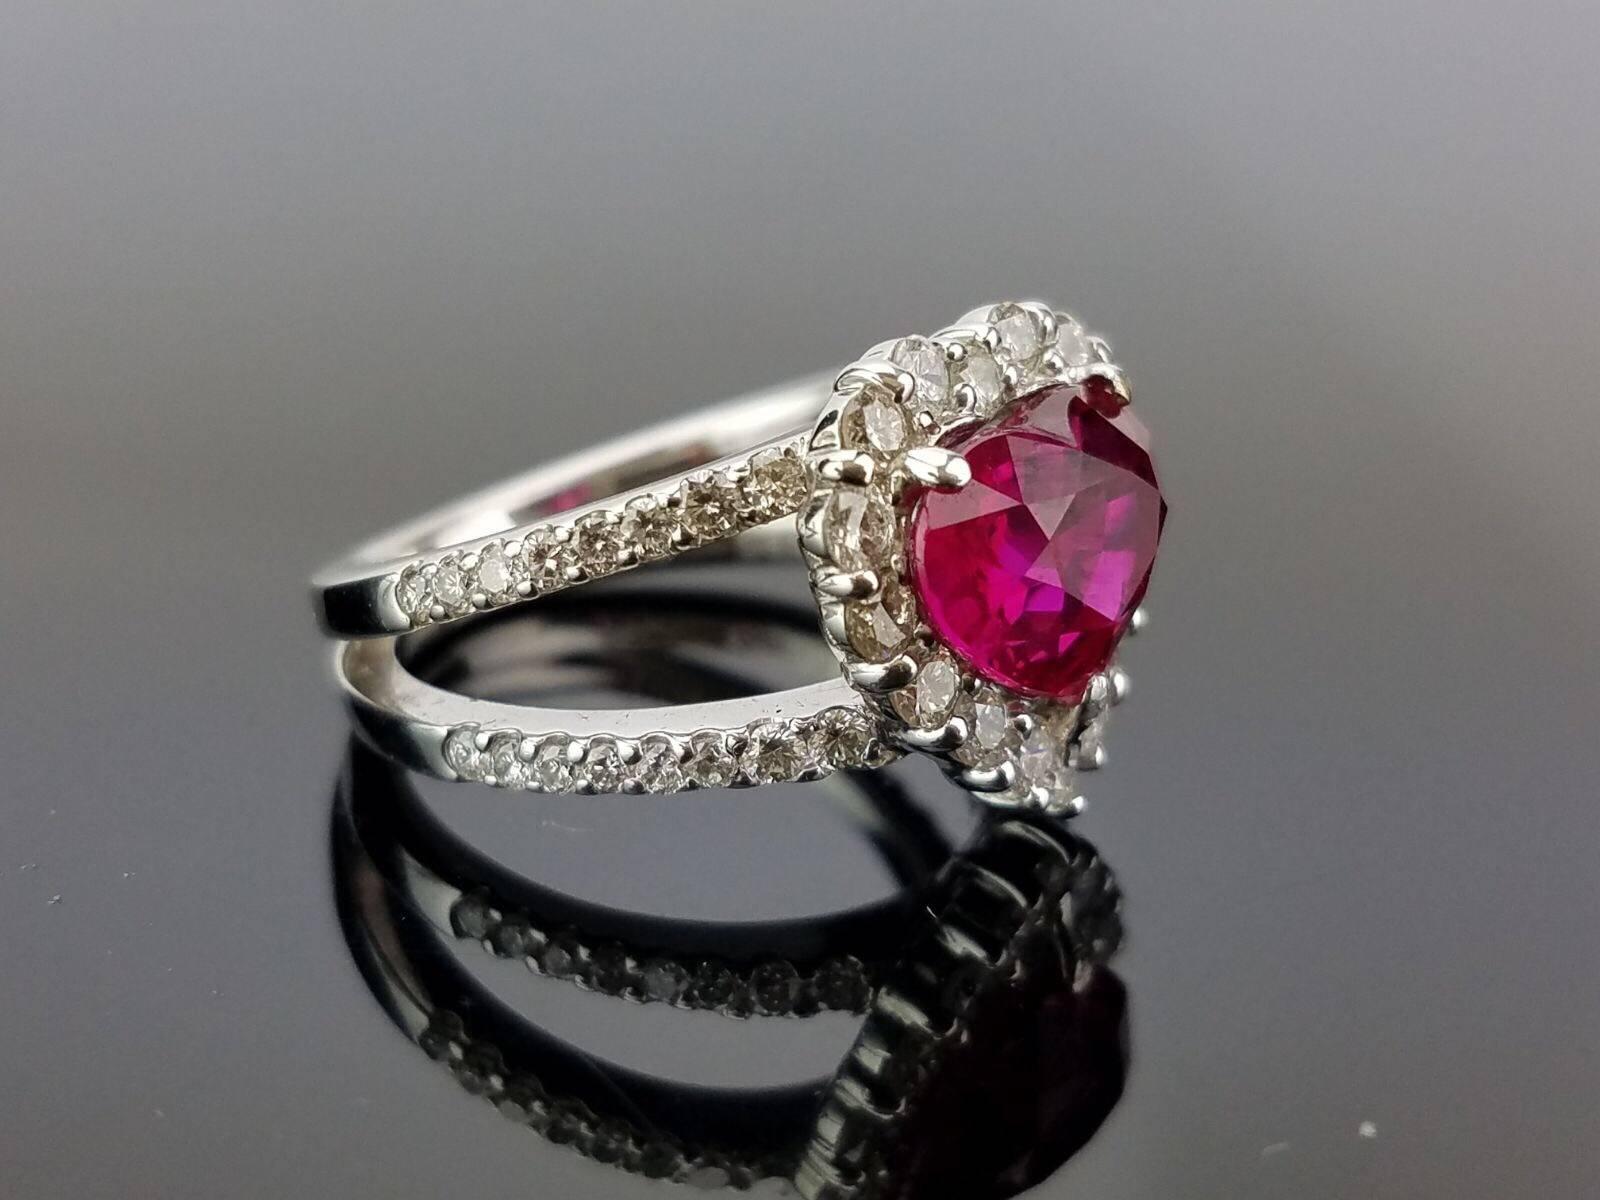 Beautiful cocktail ring, with a lustrous 3.02 carat heart shaped Burmese Ruby with White Diamond cocktail ring, all set in a white Platinum band. 

Stone Details: 
Stone: Burmese Ruby 
Carat Weight: 3.02 Carat

Diamond Details:
Total Carat Weight: